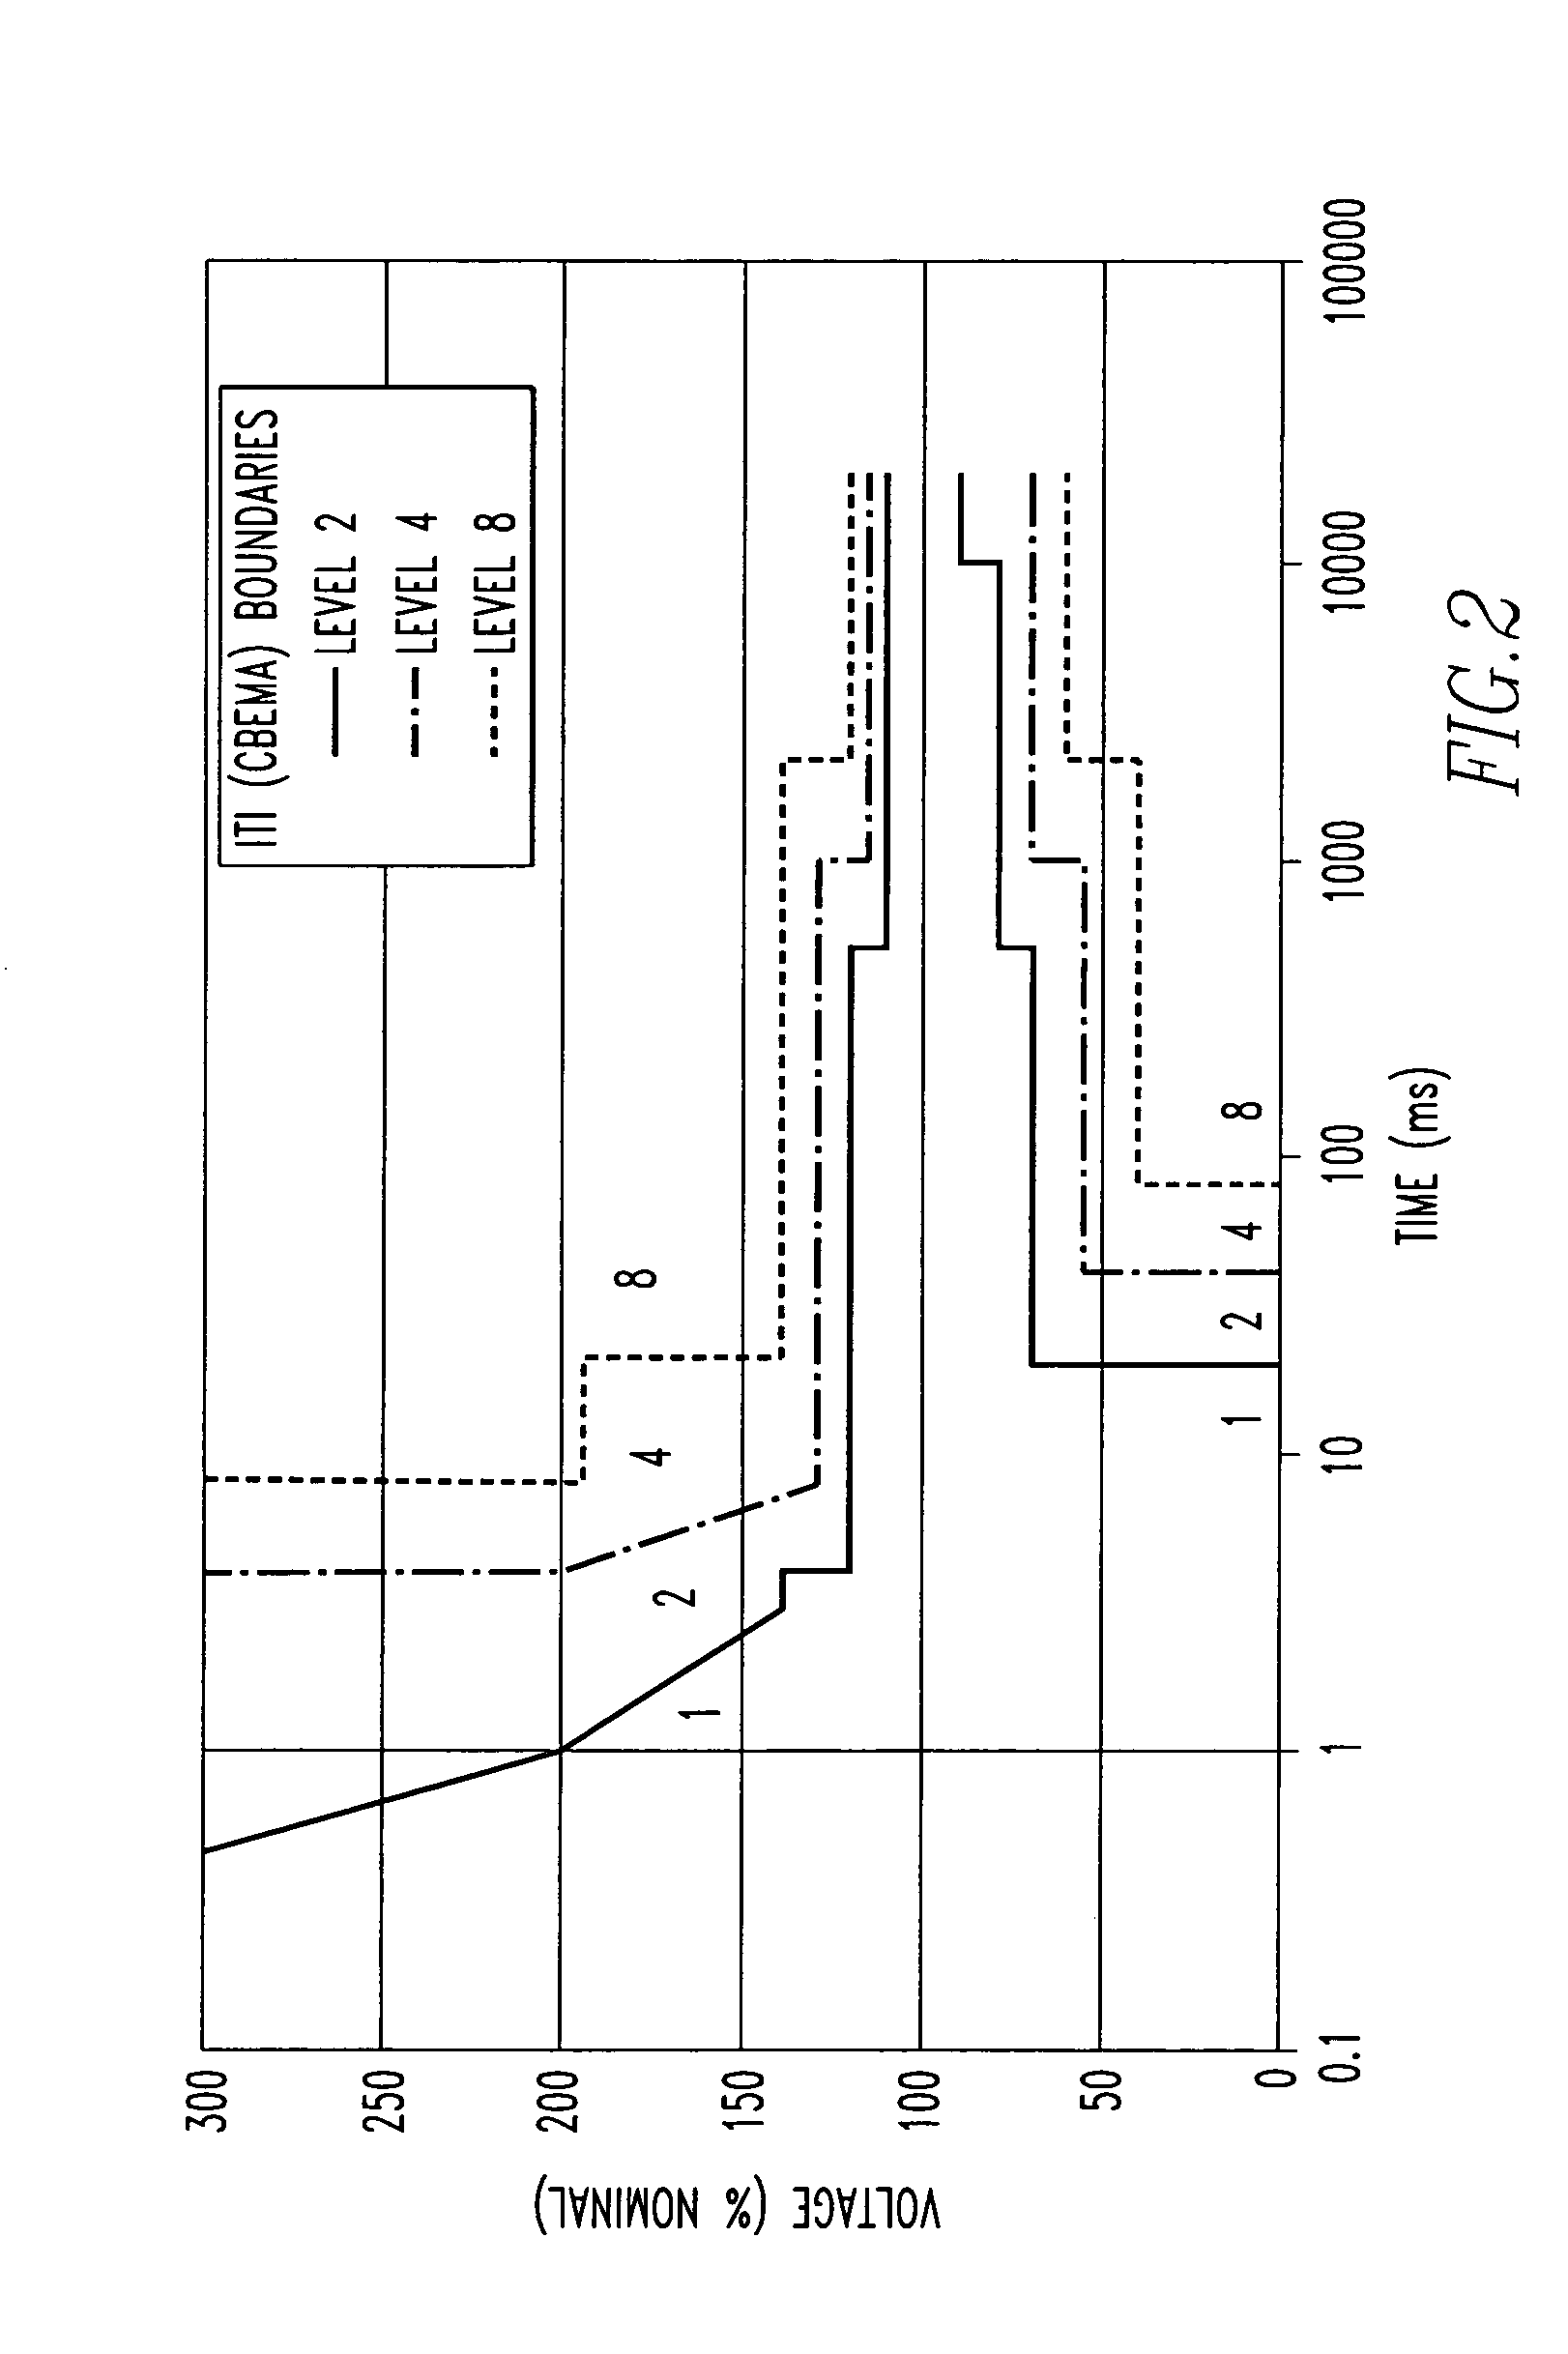 Method and apparatus for monitoring power quality in an electric power distribution system